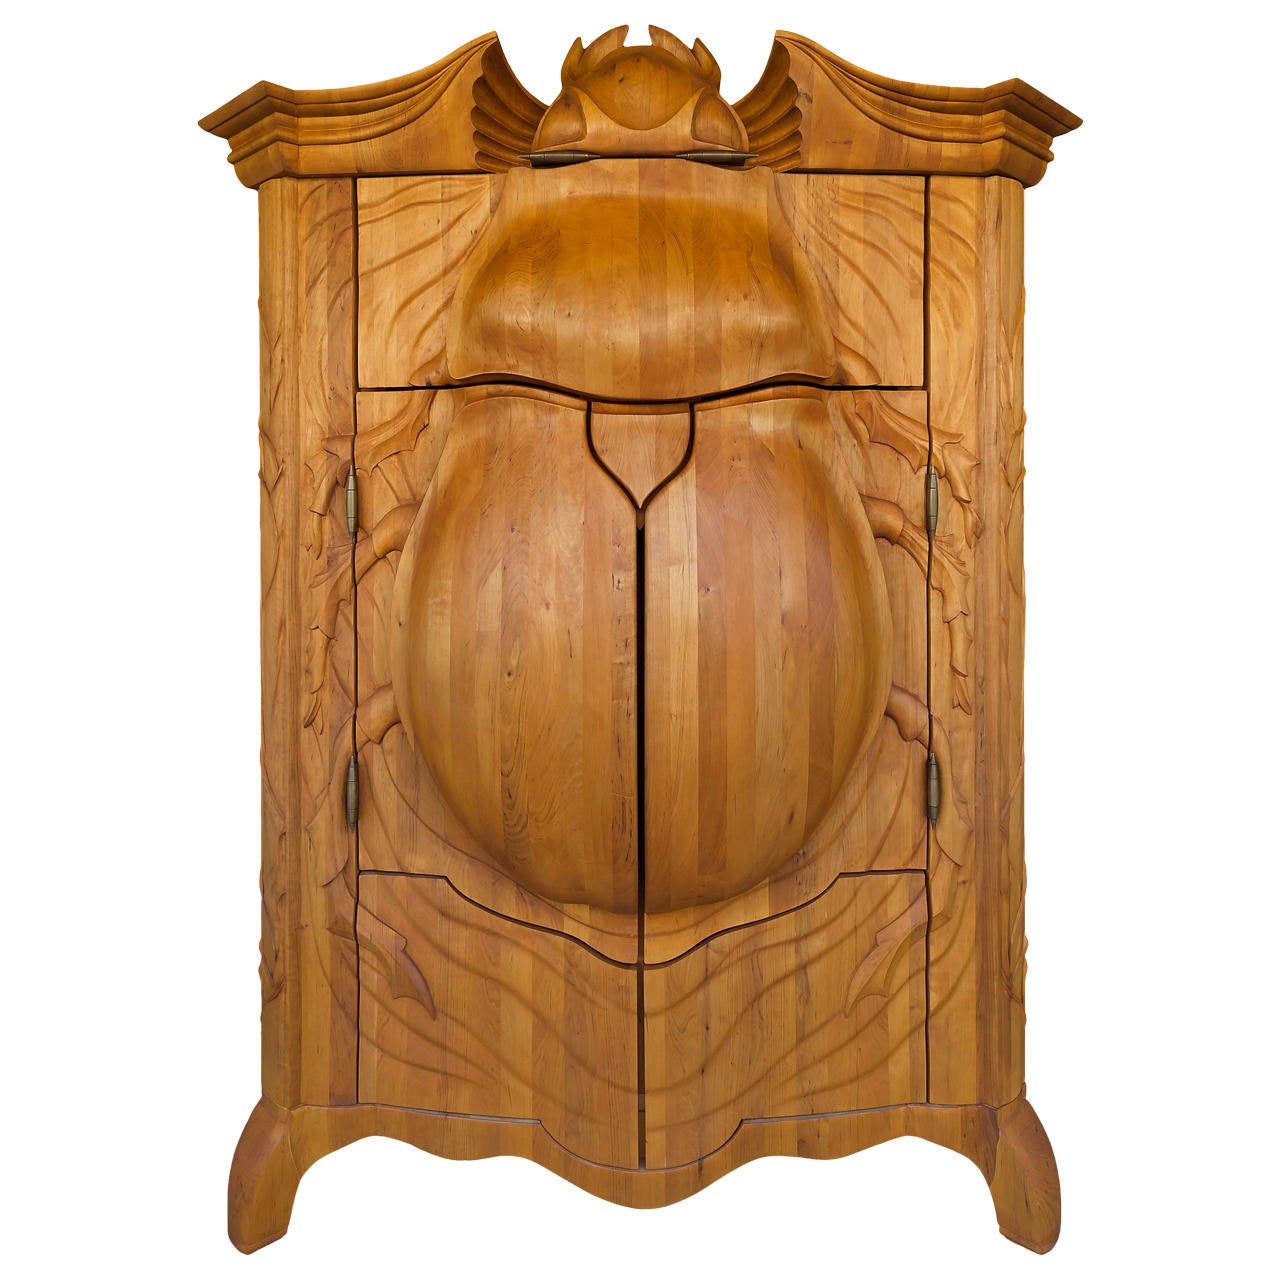 Unique and Extraordinary “Beetle” Cabinet Made by Janis Straupe, Latvia, 2014